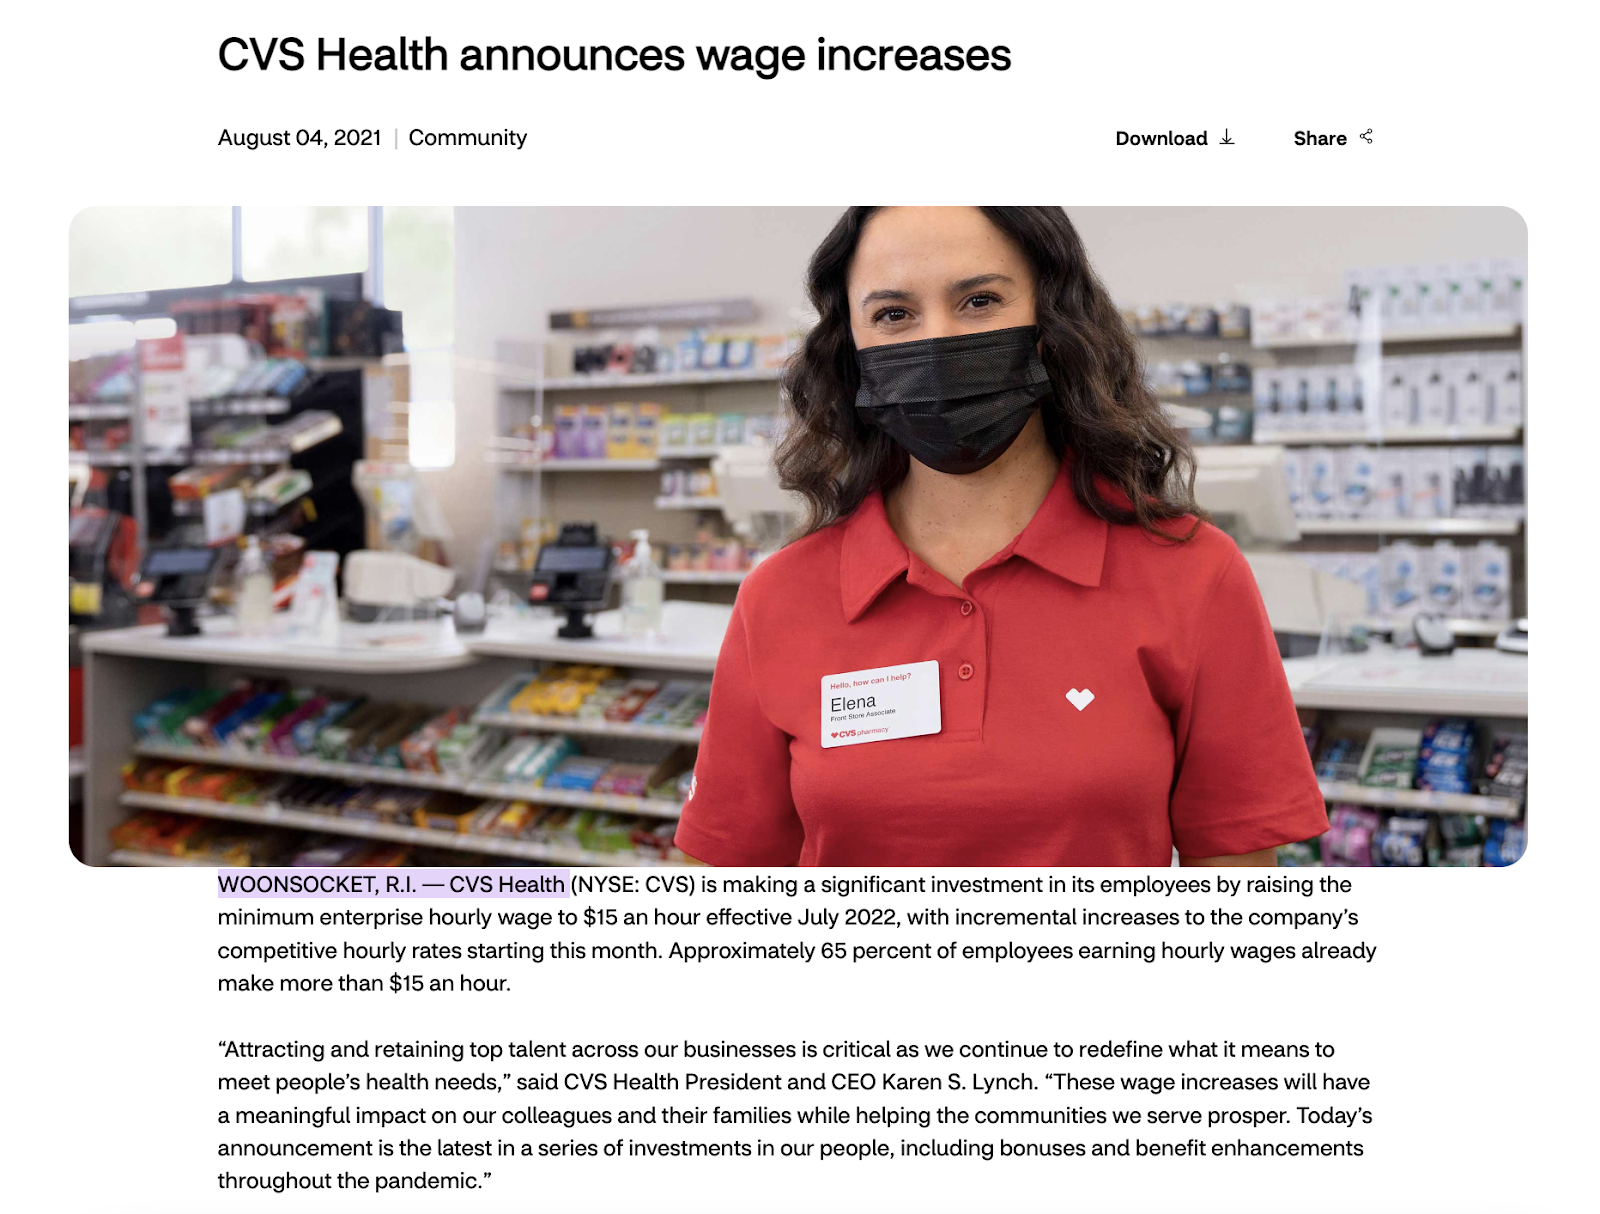 "CVS Health announces wage increases" article